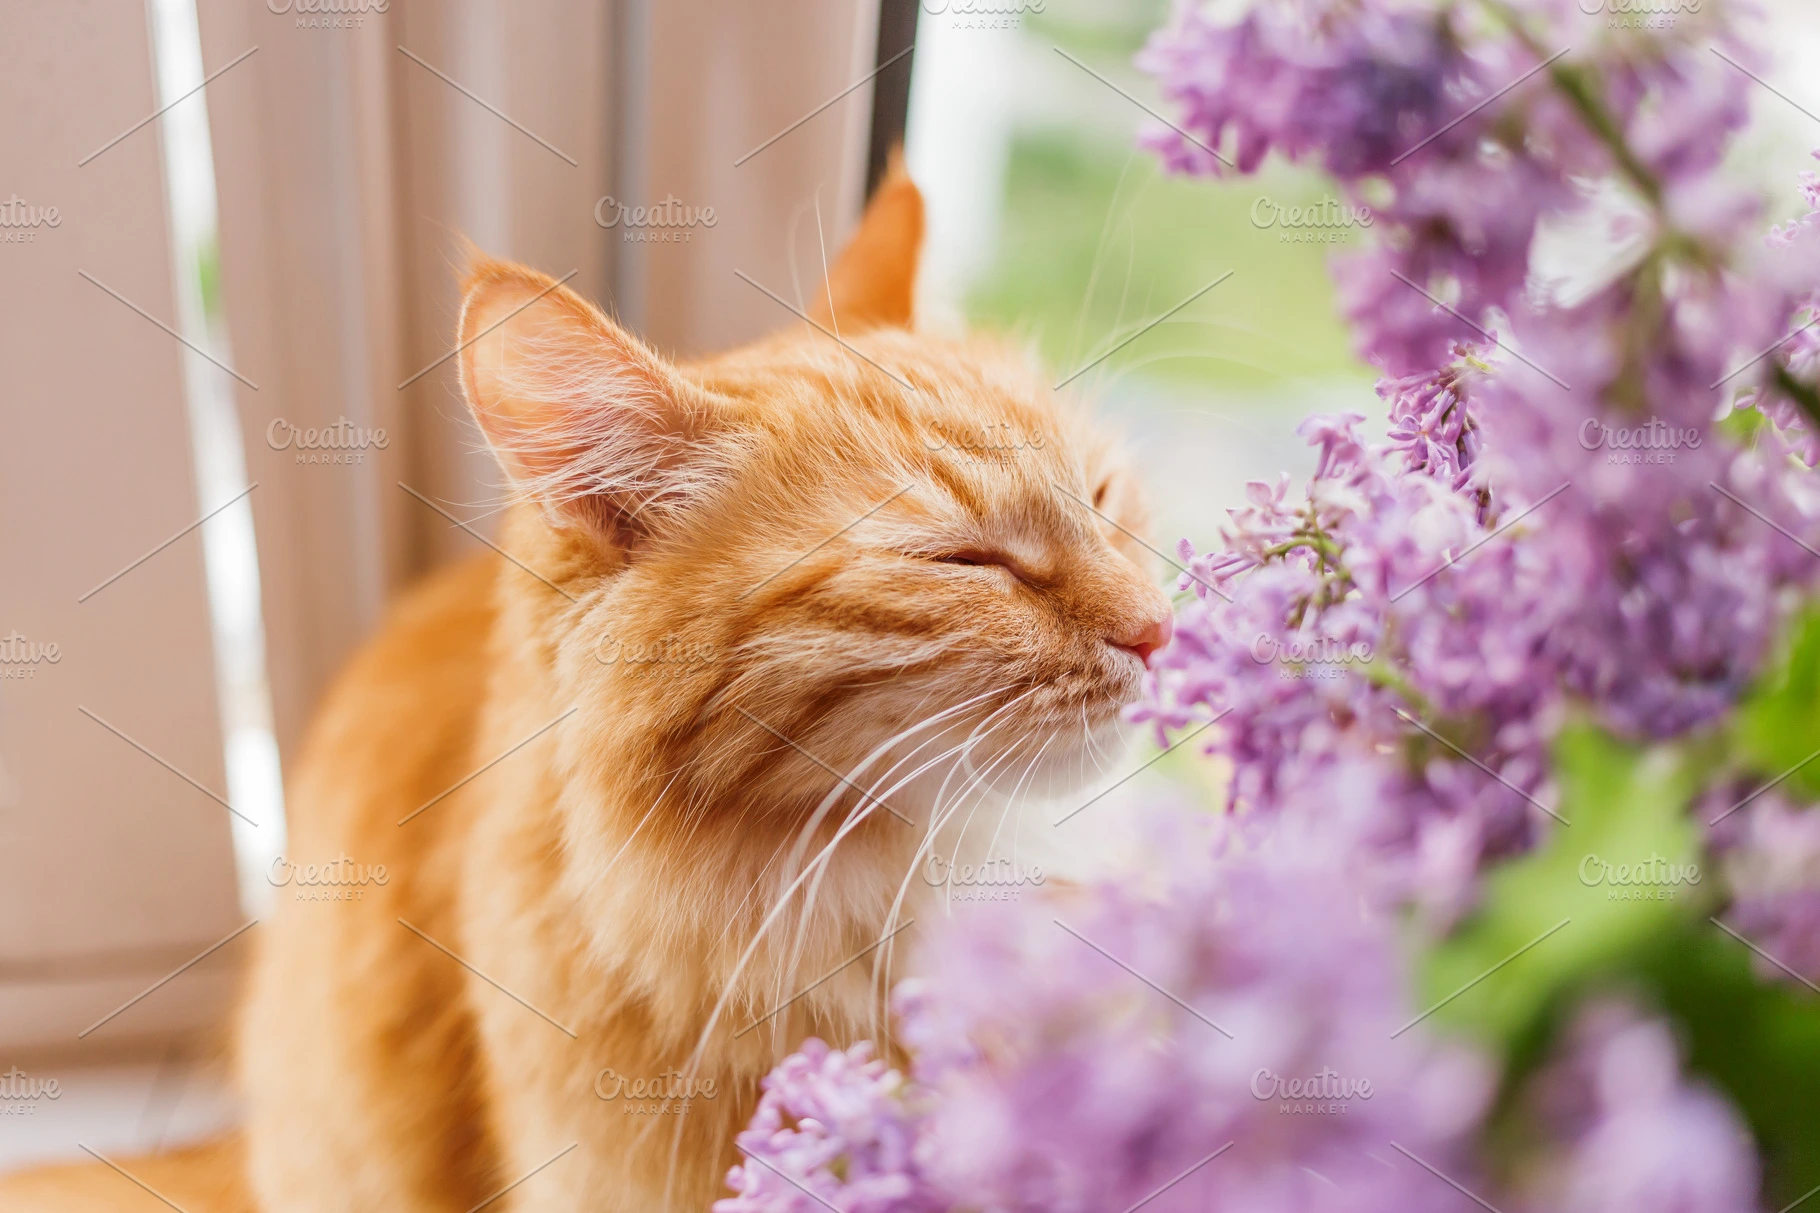 Cute cat smelling lilac flowers Animal Photos Creative Market